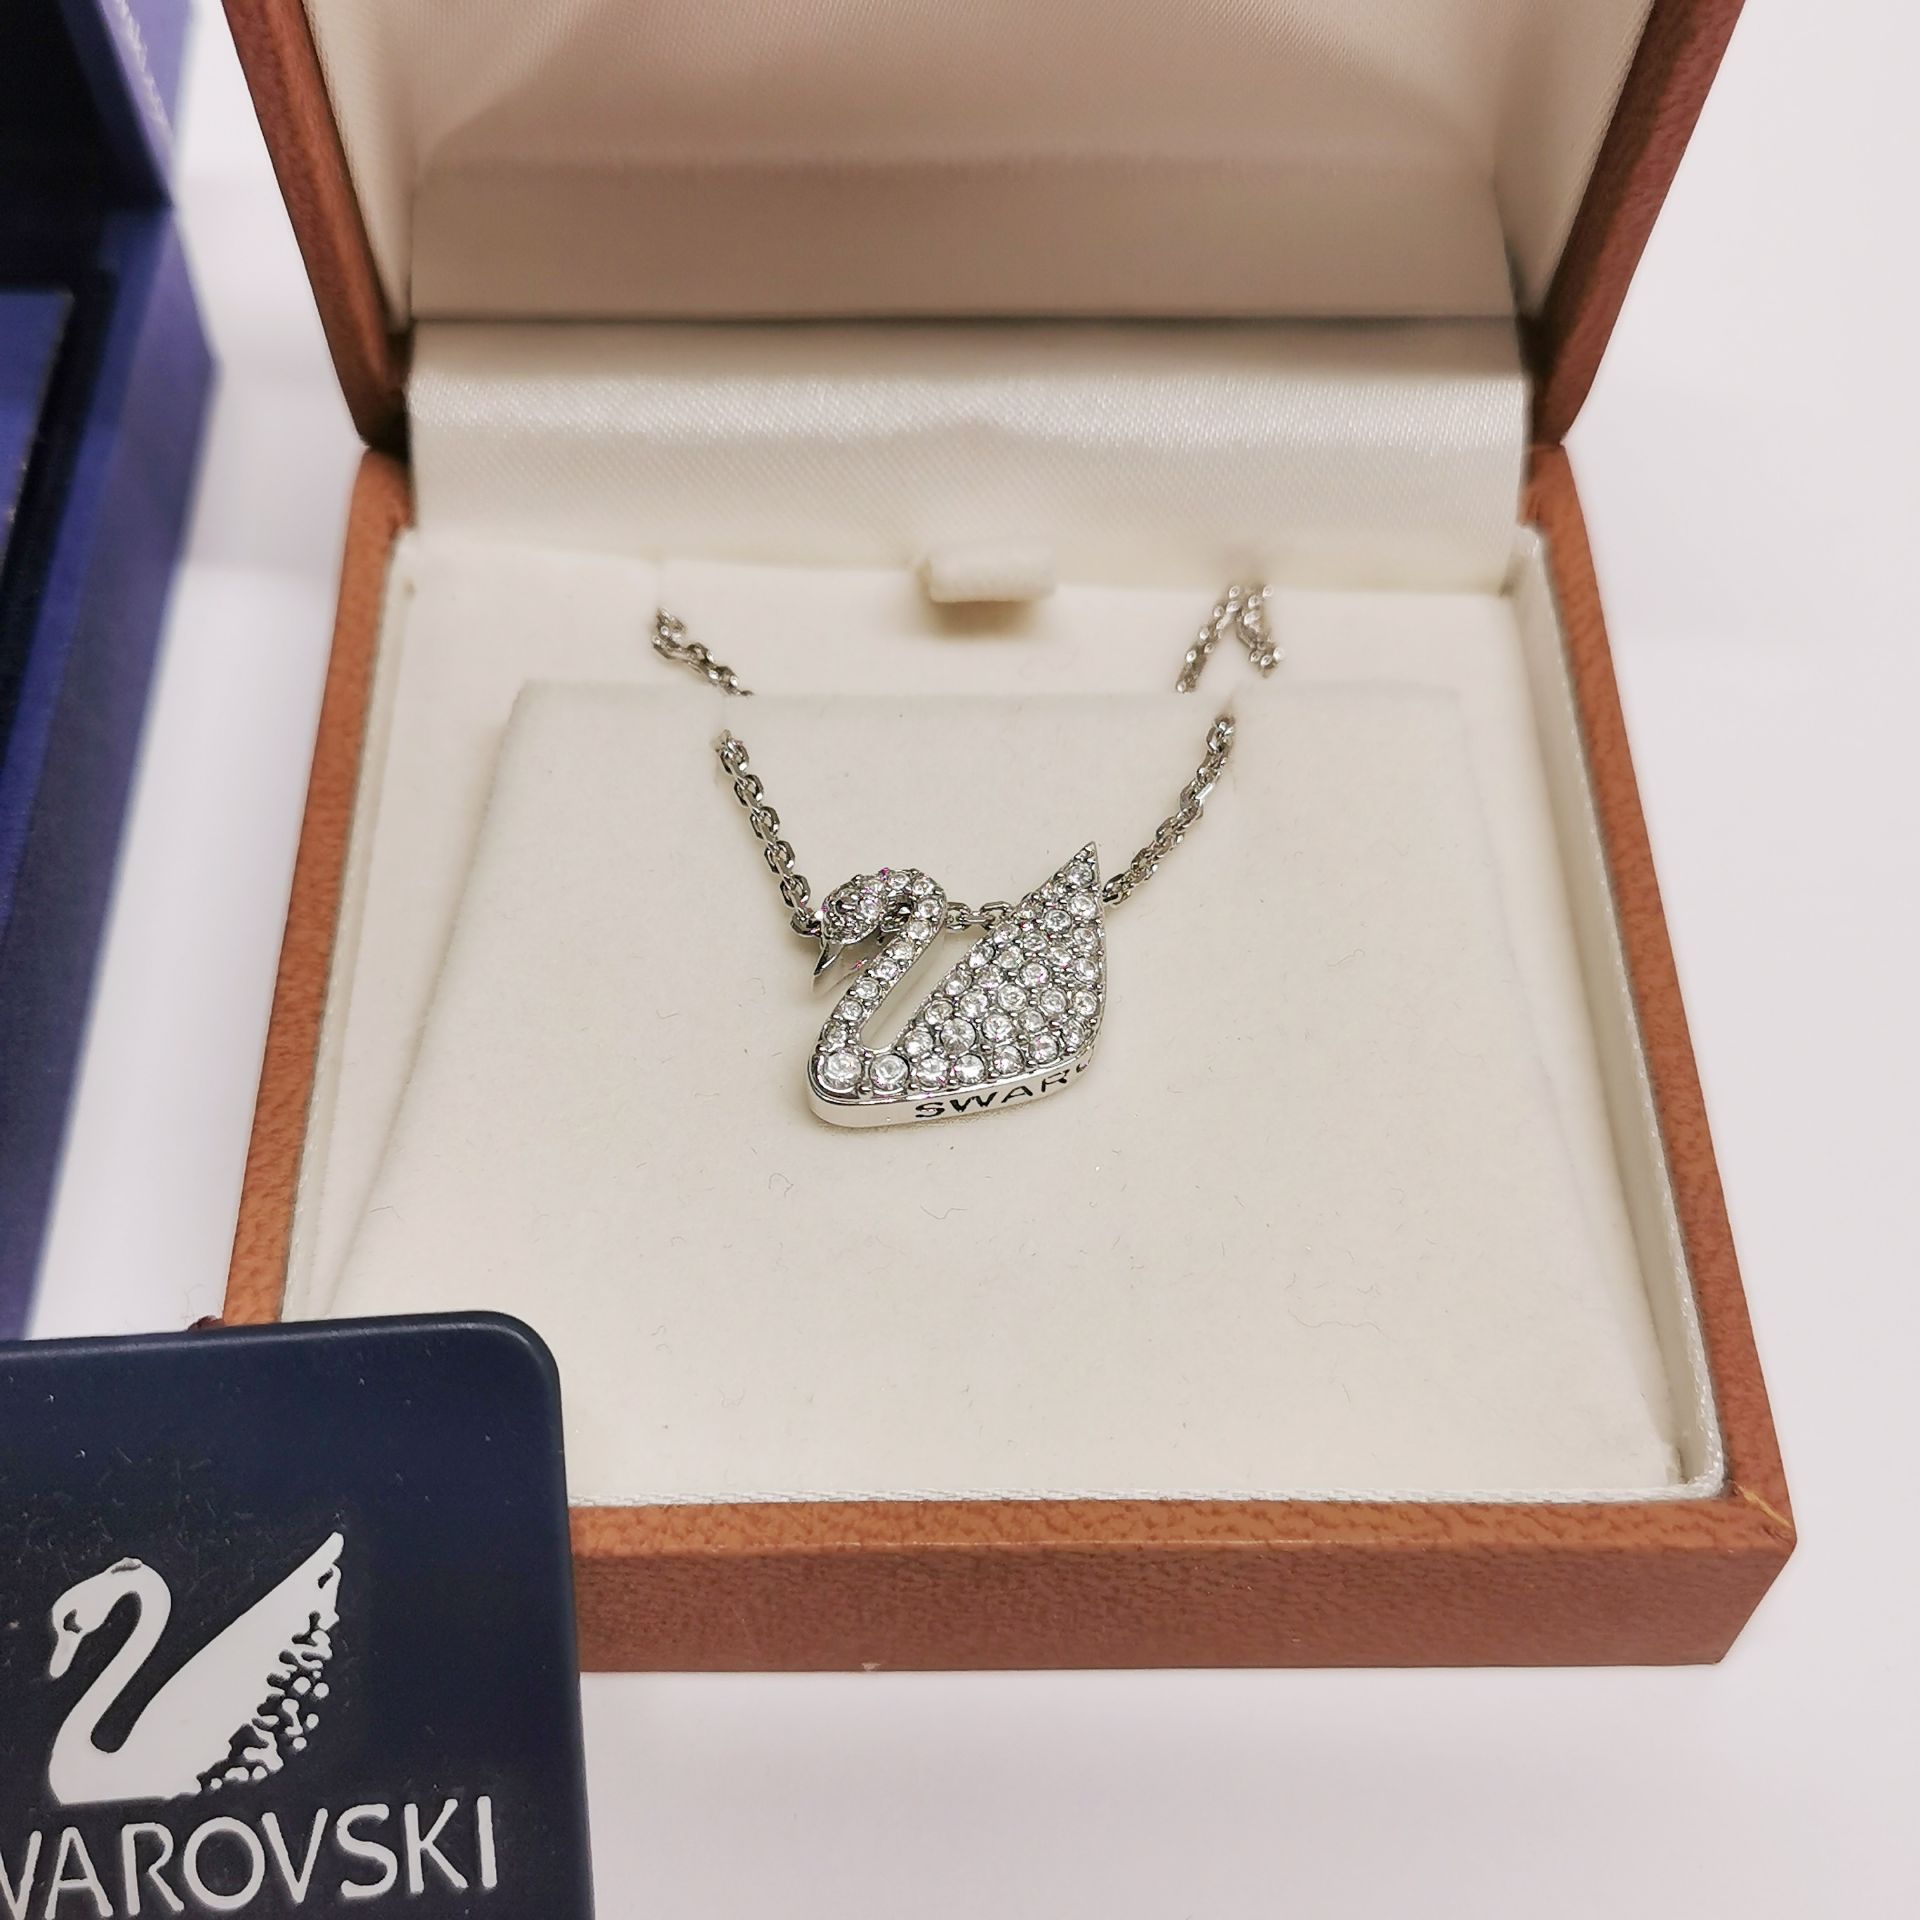 A boxed Swarovski necklace and a pair of earrings. - Image 2 of 4